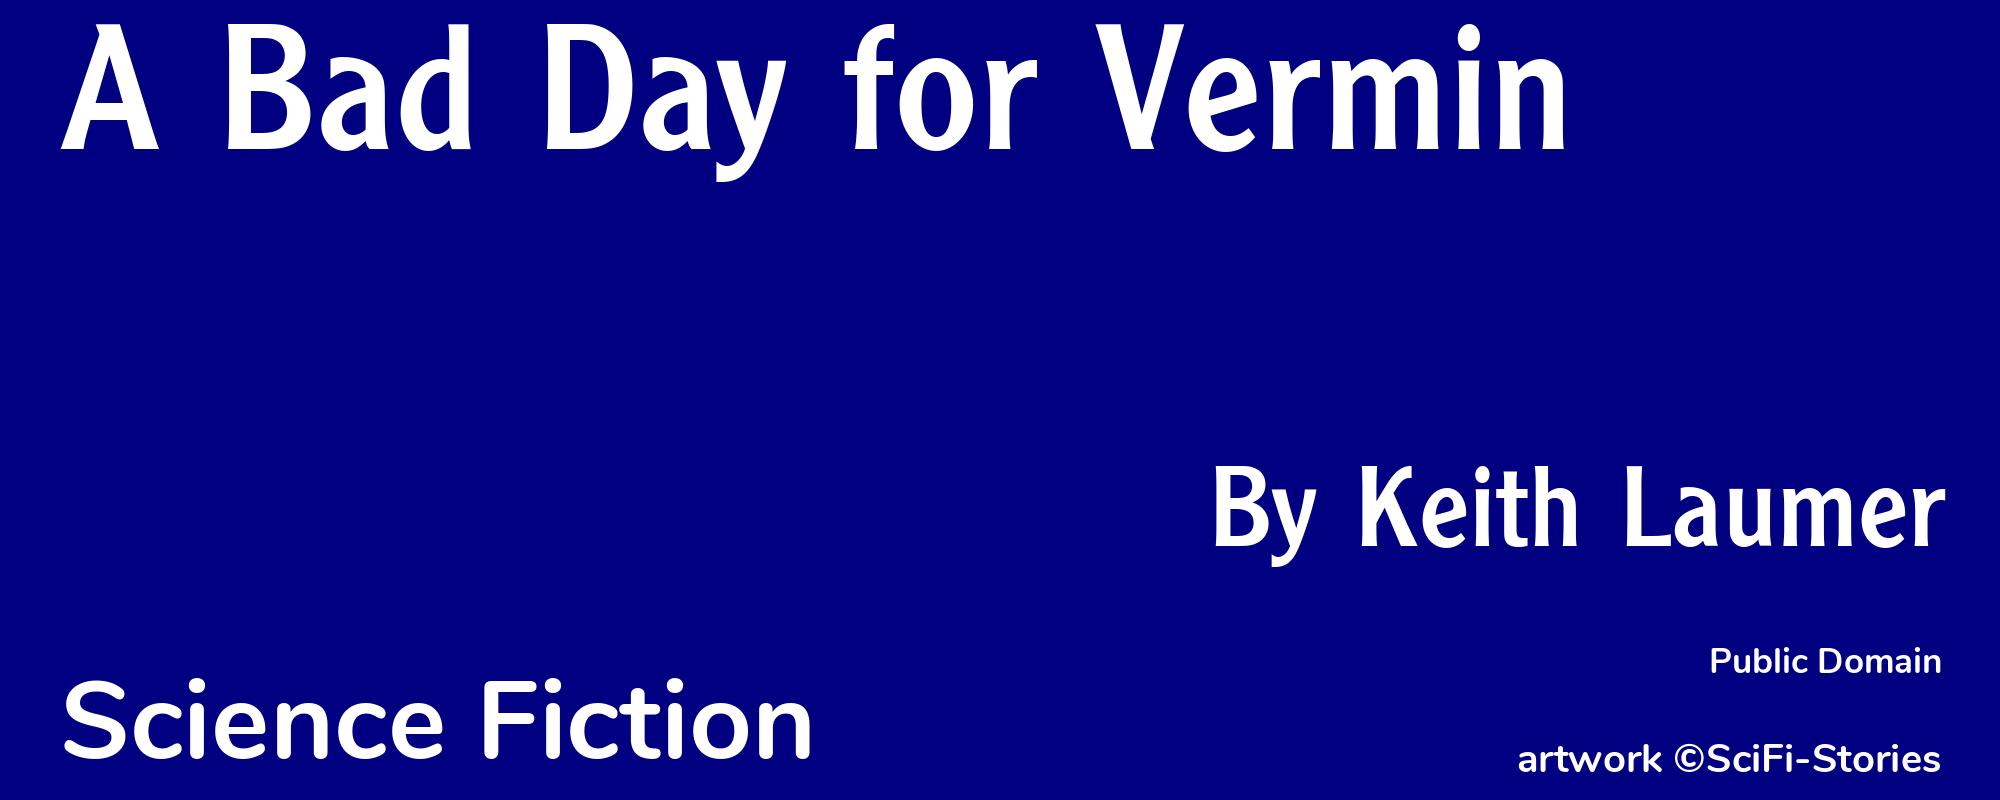 A Bad Day for Vermin - Cover